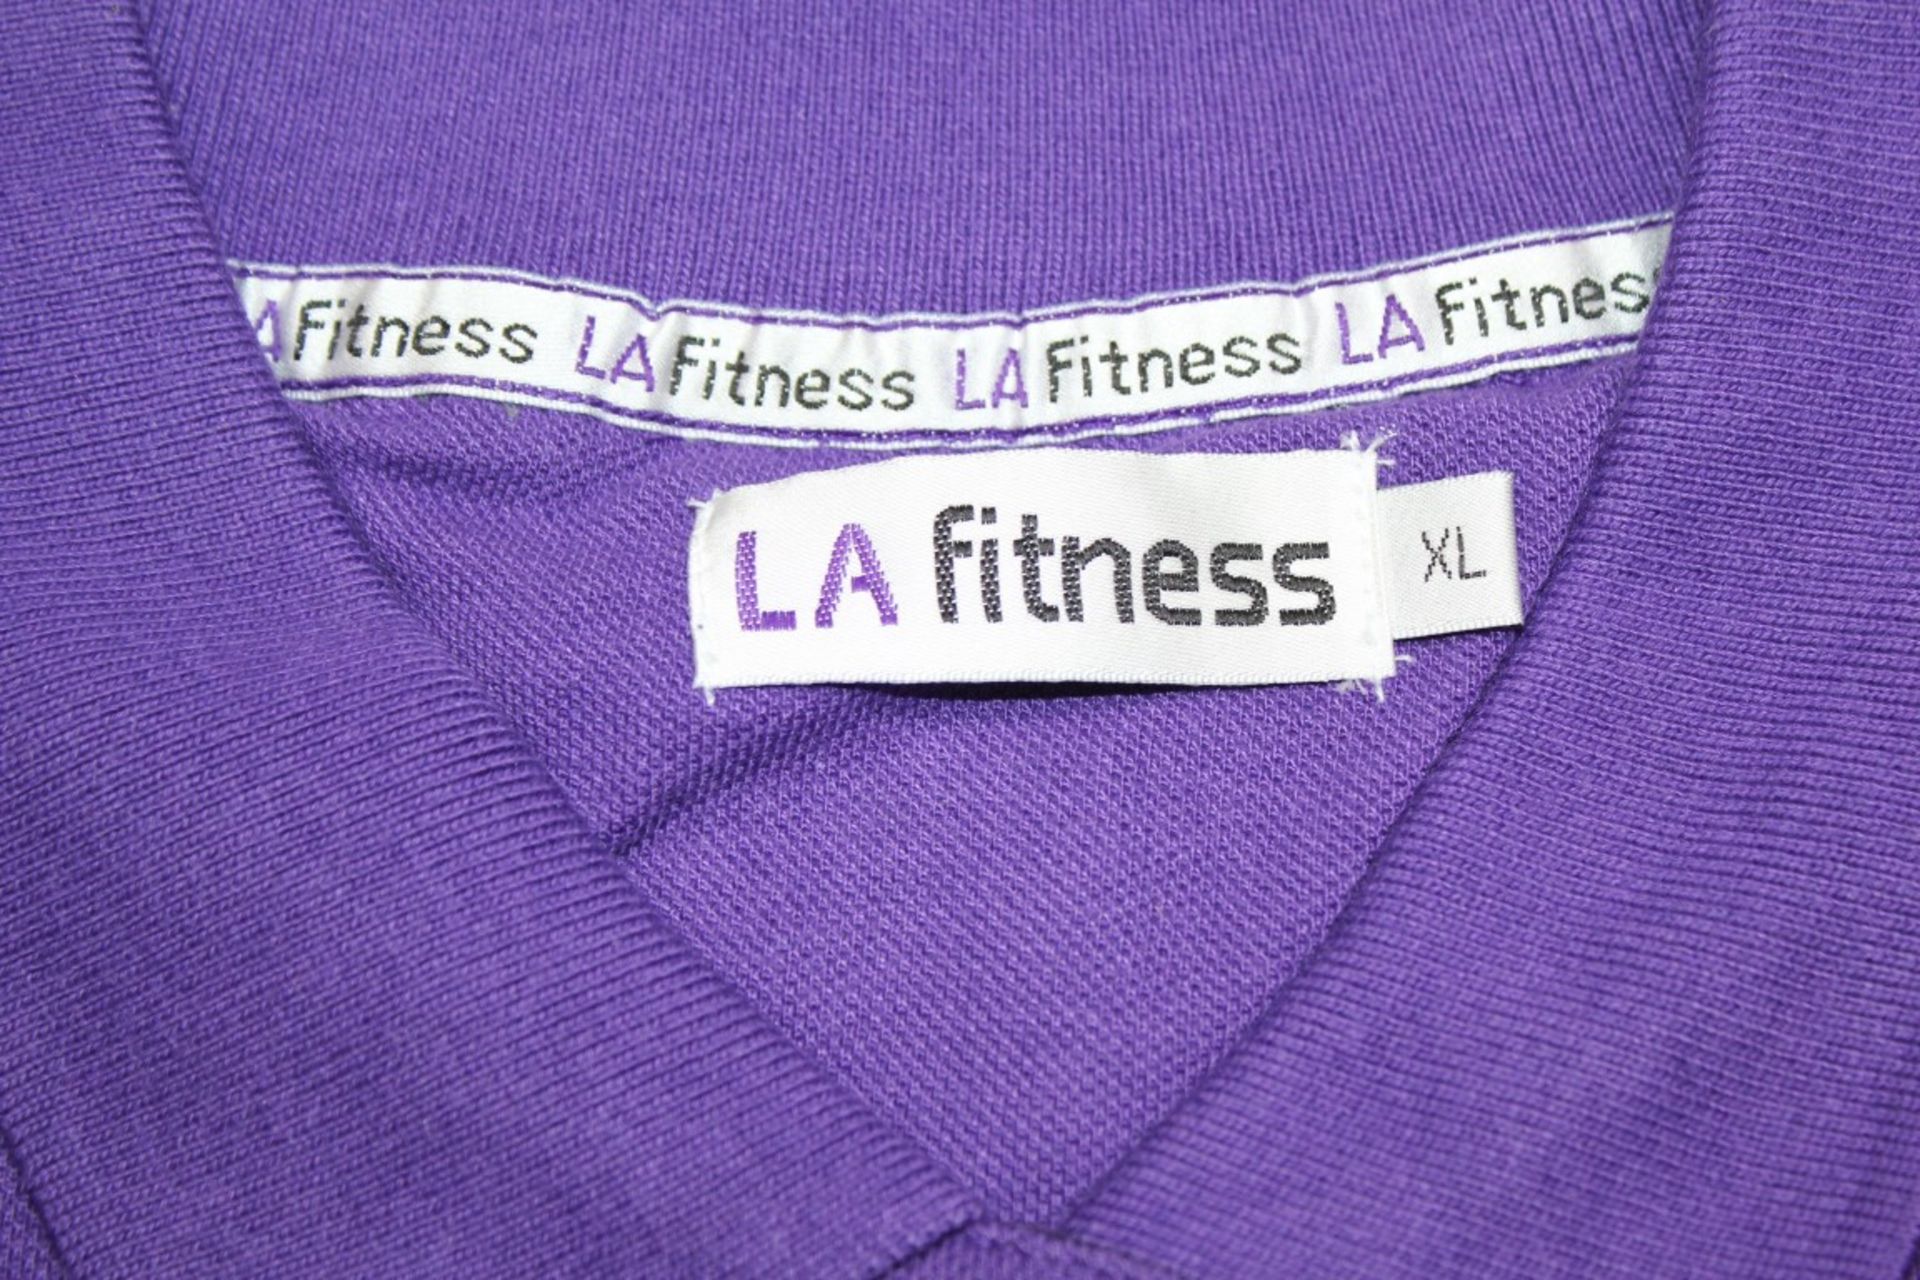 23 x LA FITNESS Branded Ladies Polo Shirts - All X-Large - Colour: Purple / Black - New & Sealed - Image 4 of 4